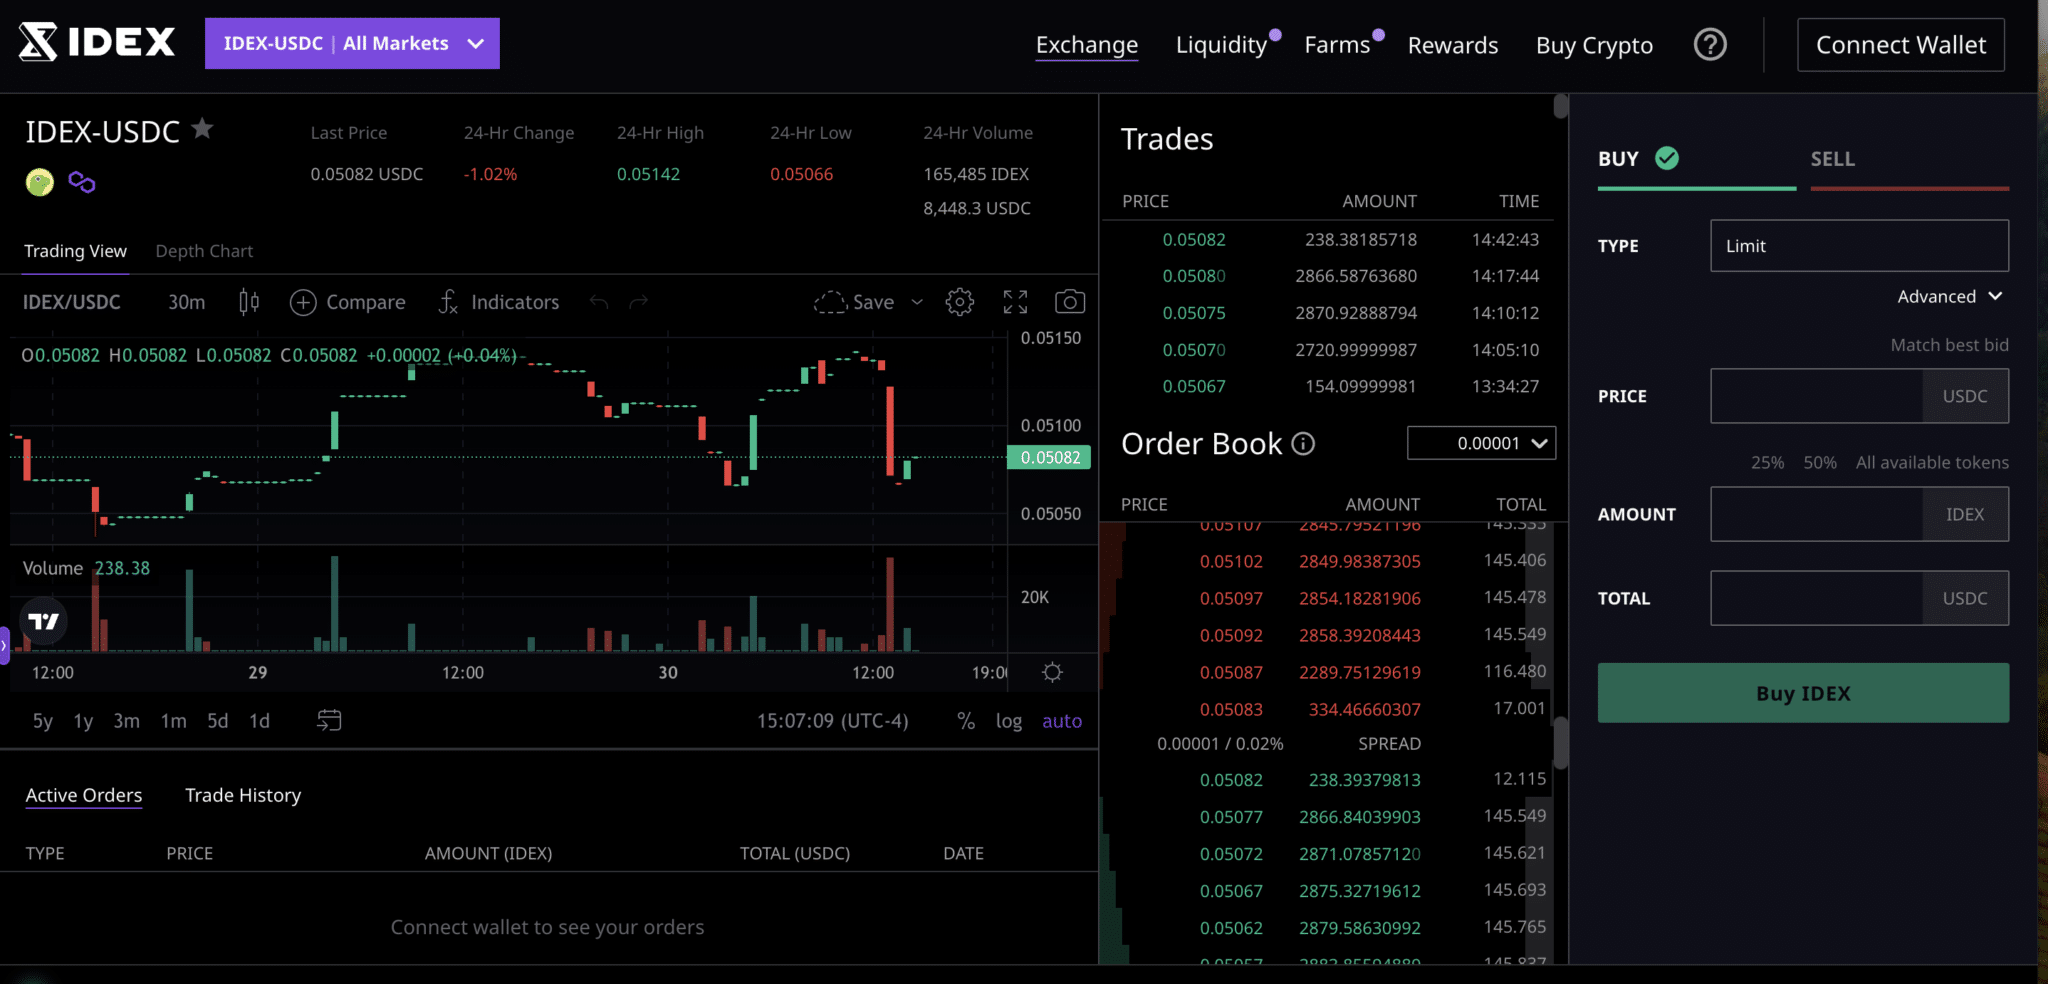 Buying and selling on IDEX